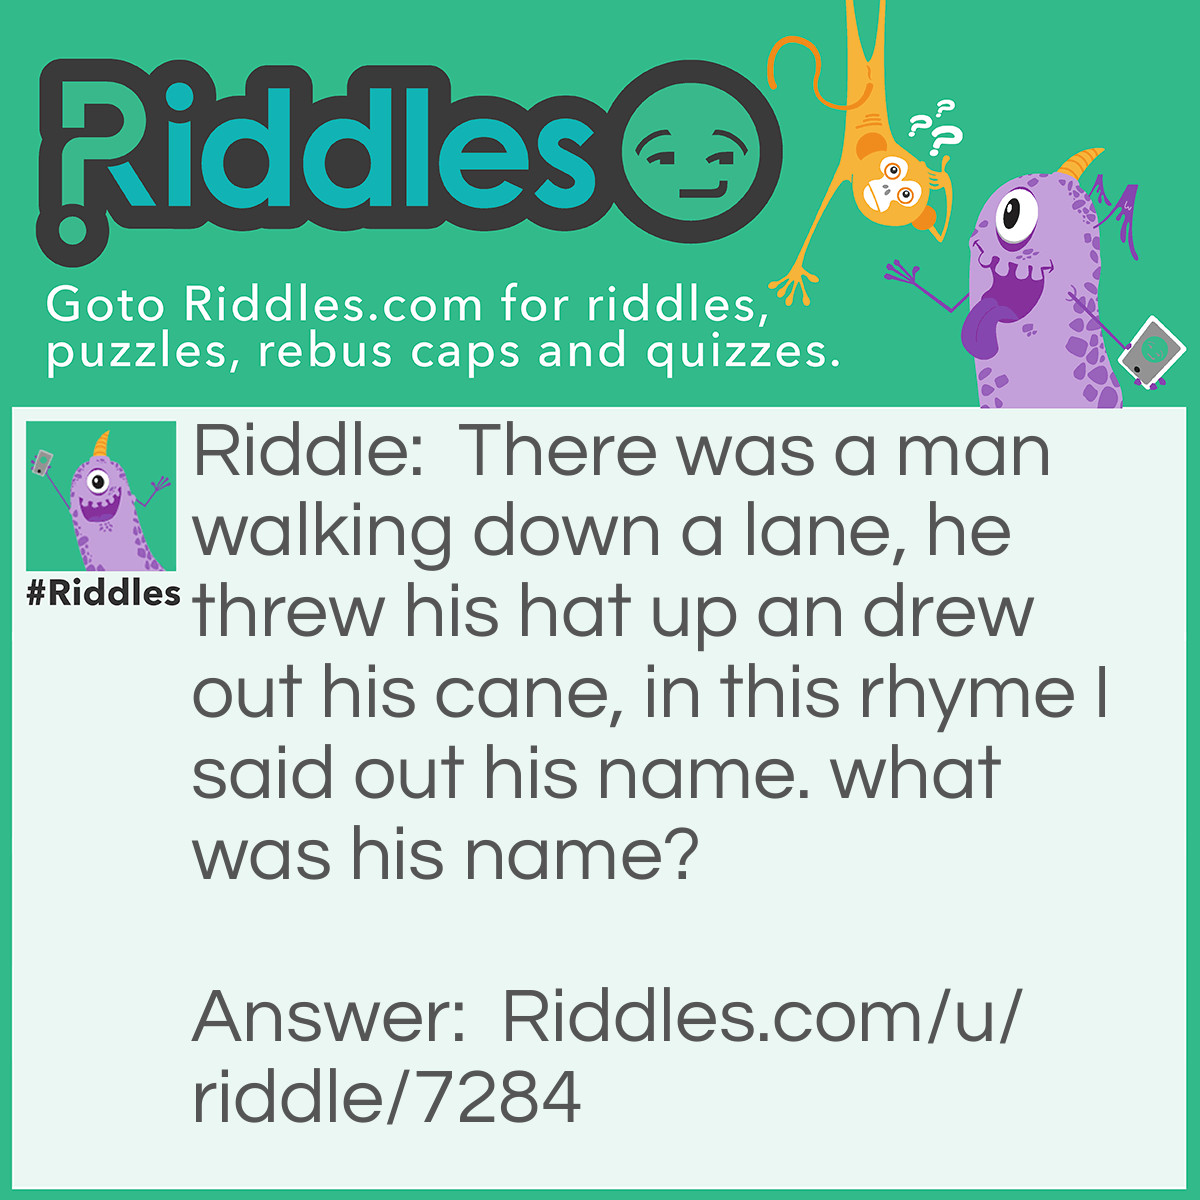 Riddle: There was a man walking down a lane, he threw his hat up an drew out his cane, in this rhyme I said out his name. what was his name? Answer: Andrew (an-drew)